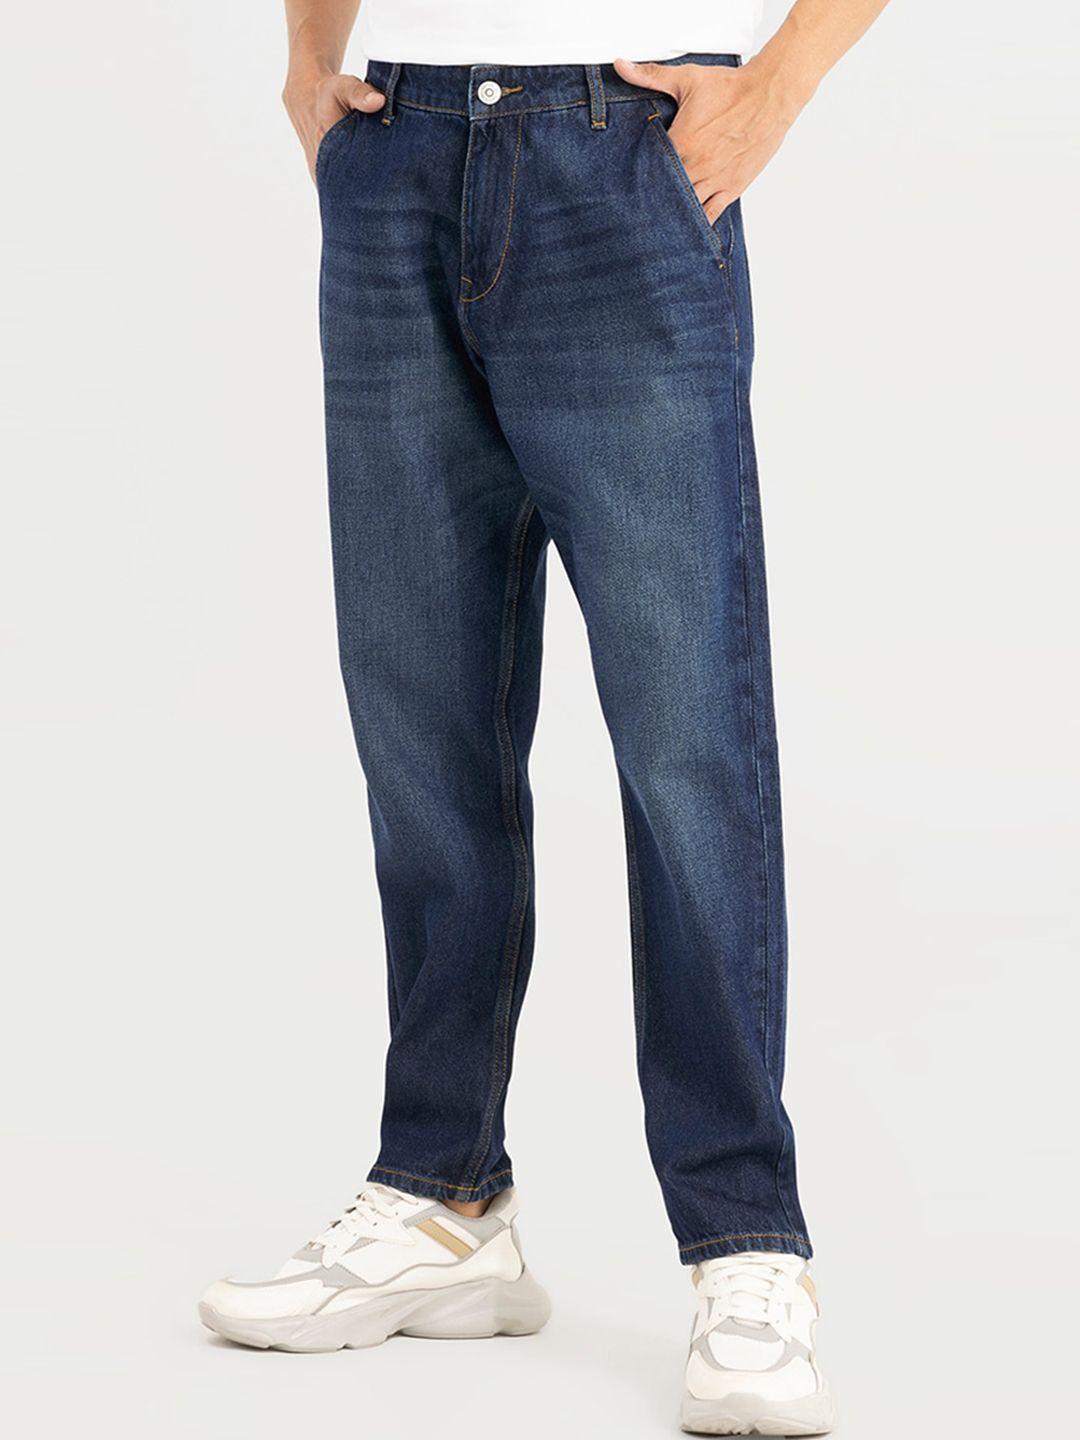 snitch-men-relaxed-fit-clean-look-light-fade-stretchable-cotton-jeans